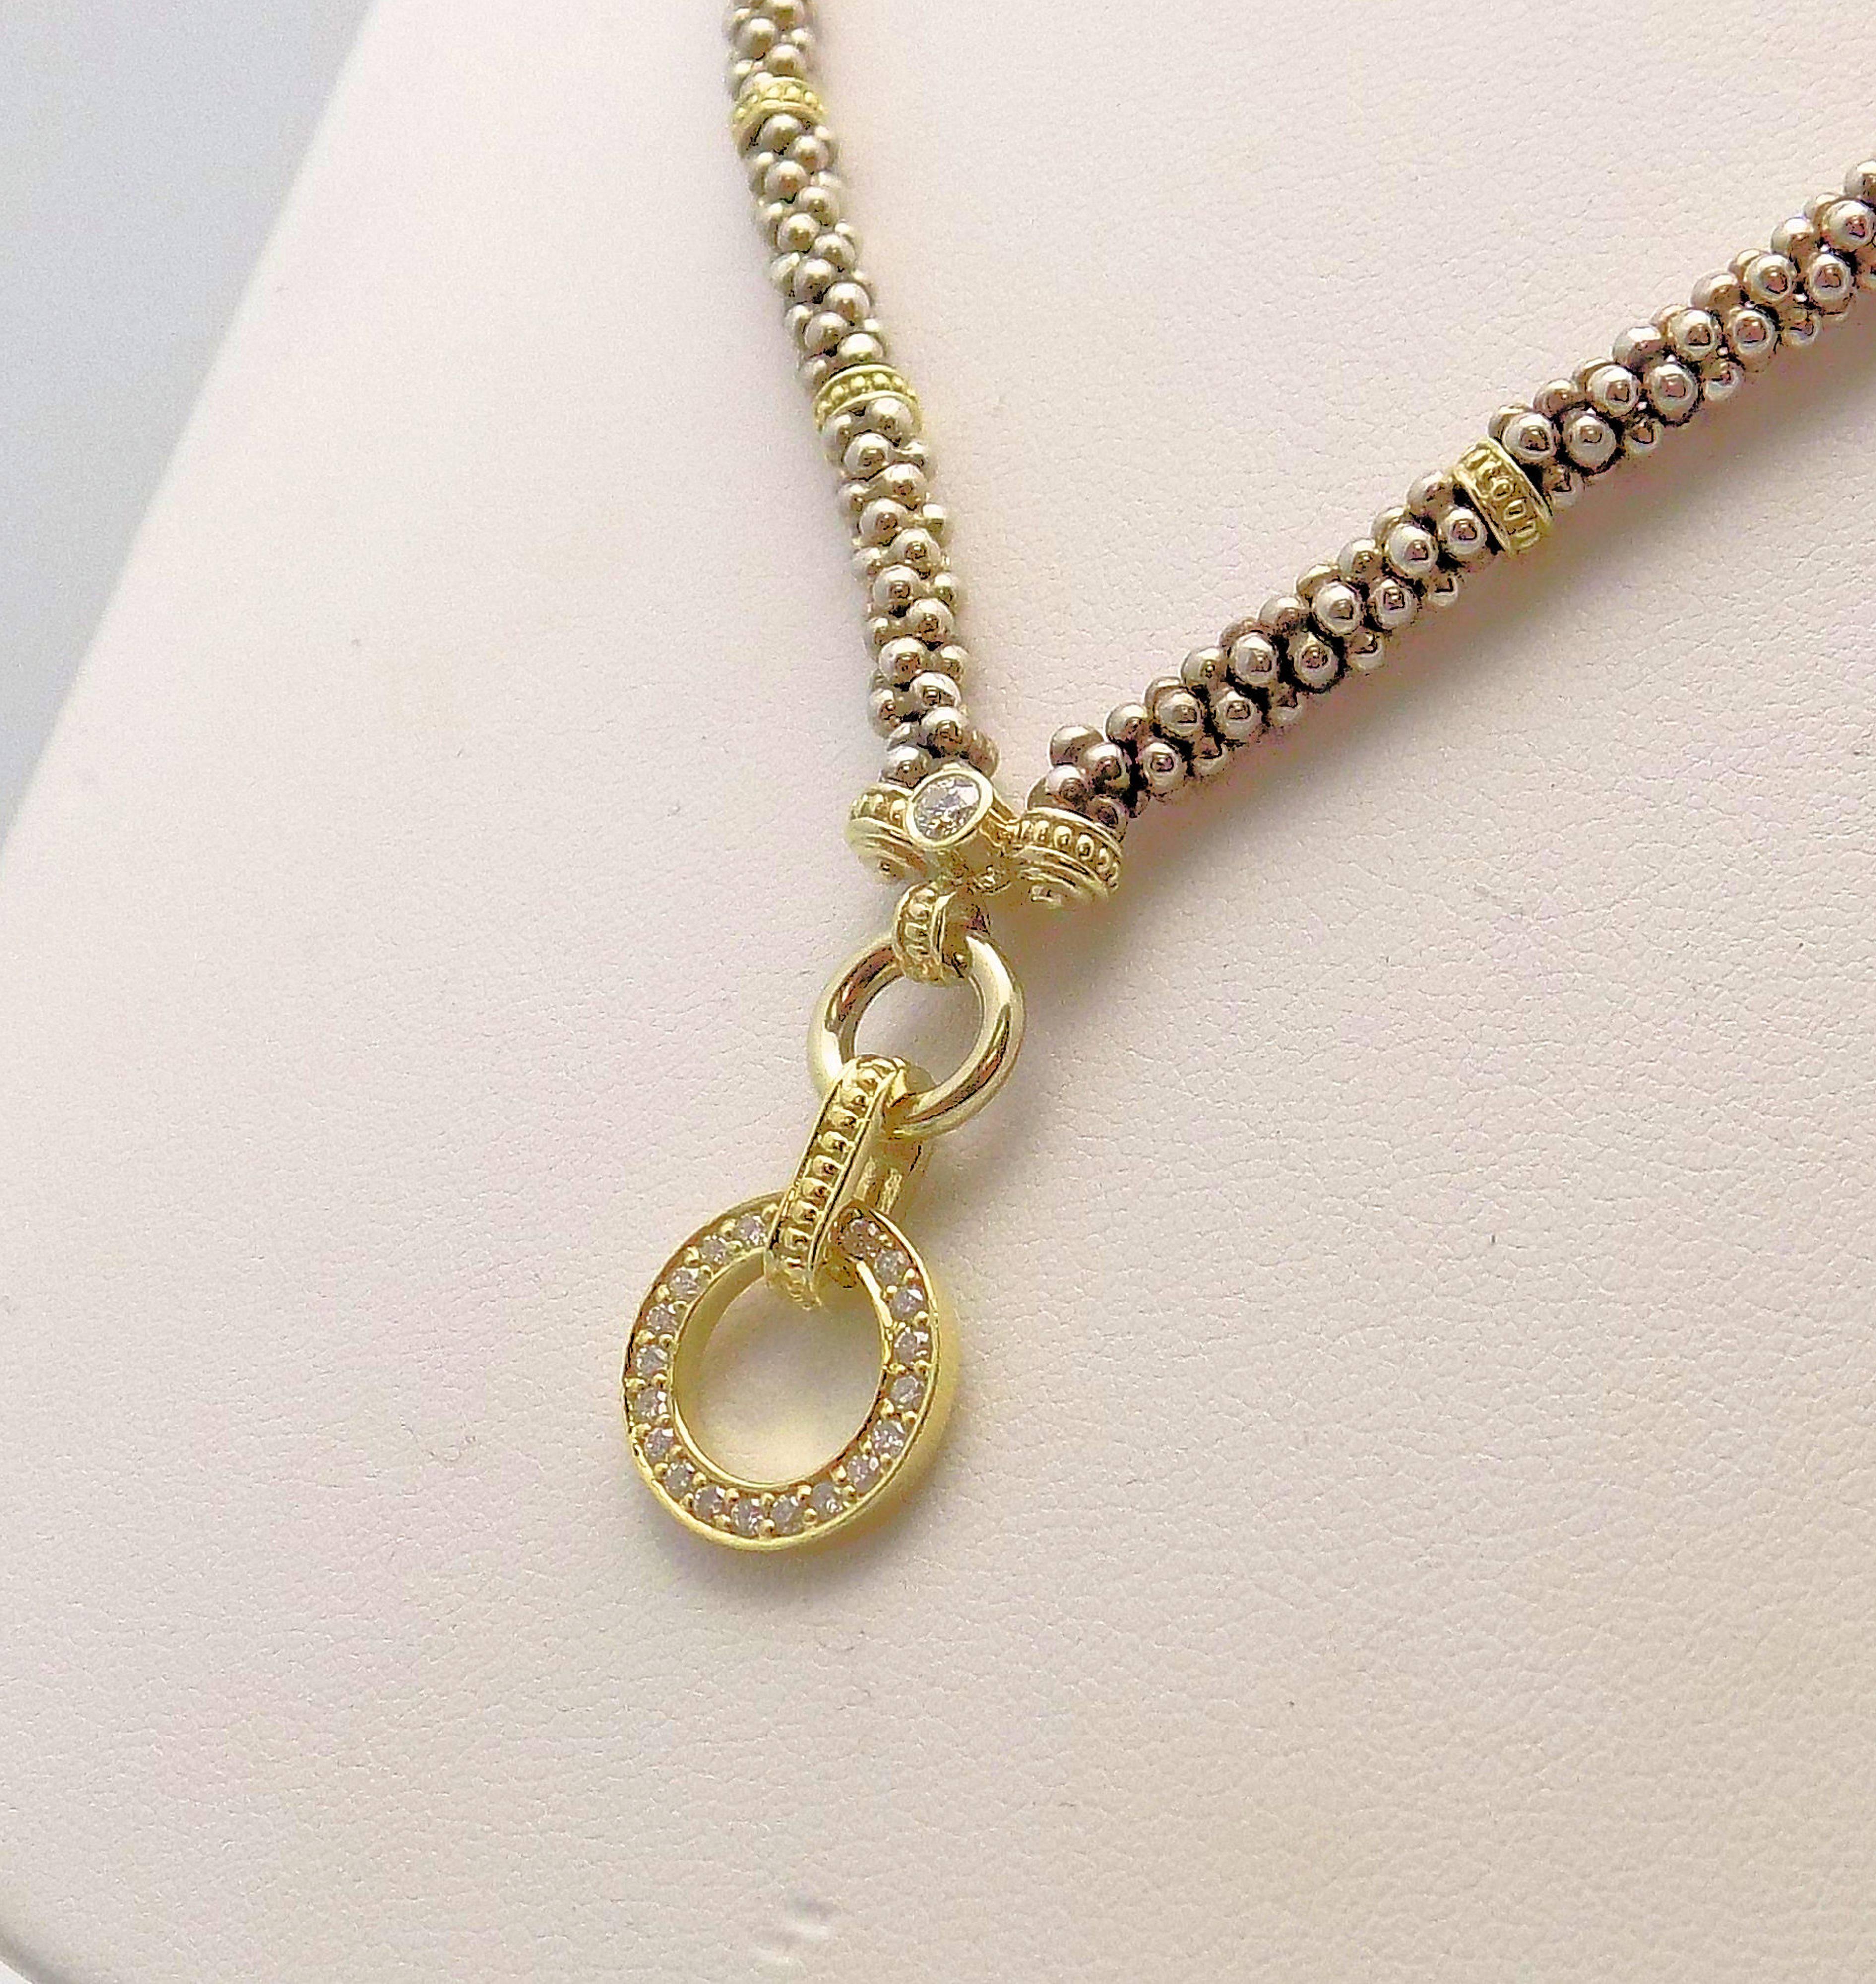 Very Popular 18 Karat Yellow Gold and Sterling Silver Necklace in the Caviar Style with a Round Pendant featuring 21 Round Brilliant Diamonds 0.40 Carat Total Weight, SI, H, 16